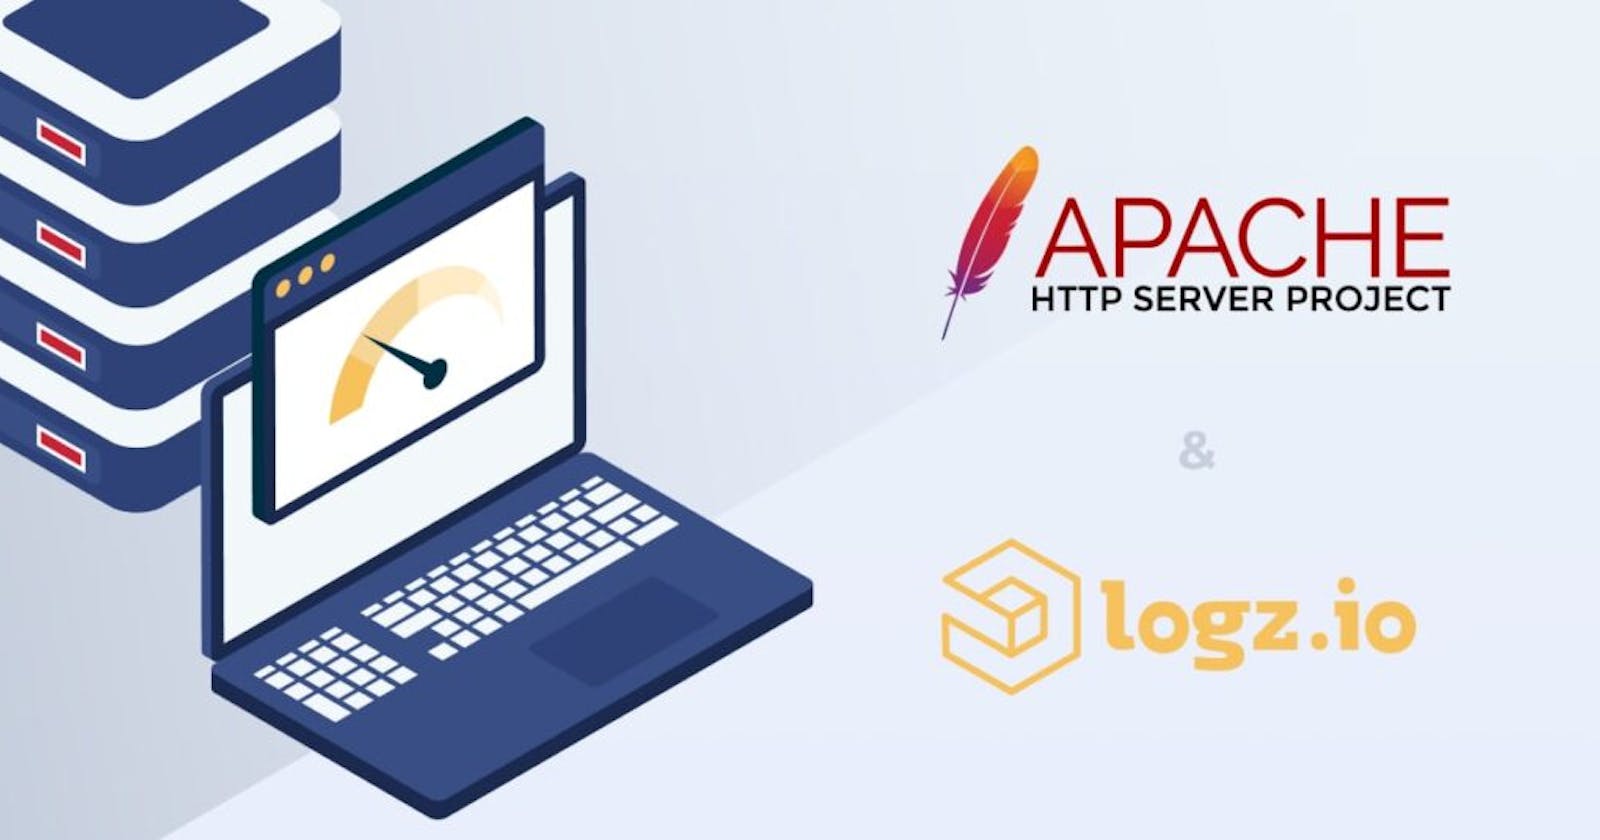 Monitoring your Web Application on Apache with Logz.io